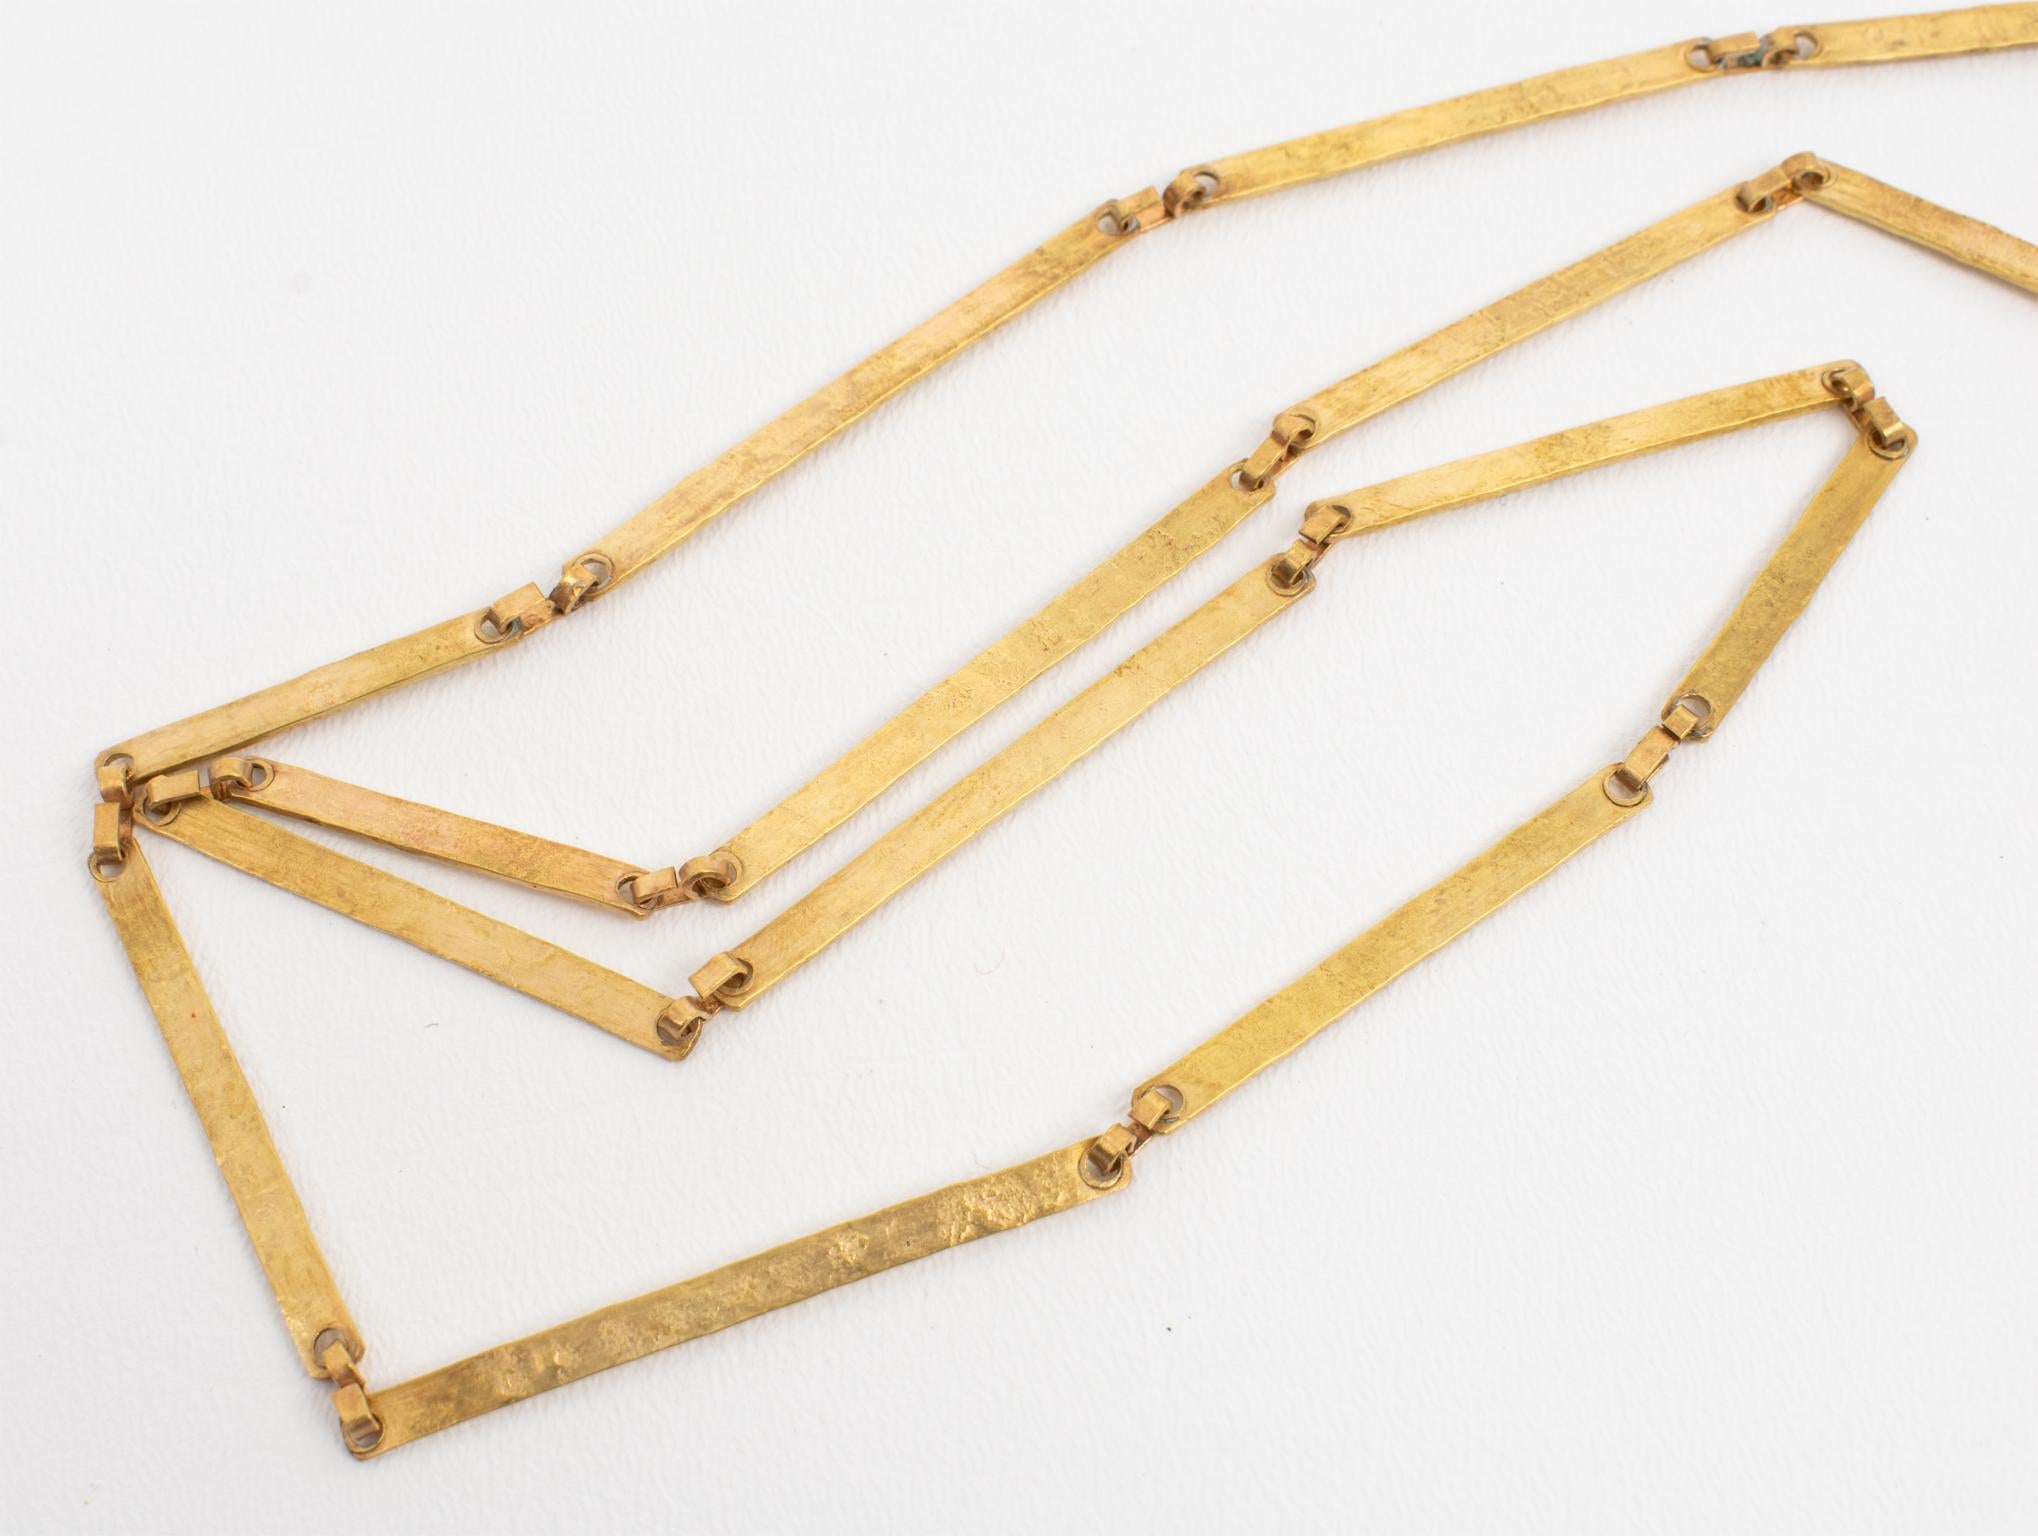 Modernist Brass and Silvered Metal Hieroglyph or Ethnic Graffiti Necklace, 1960s For Sale 6